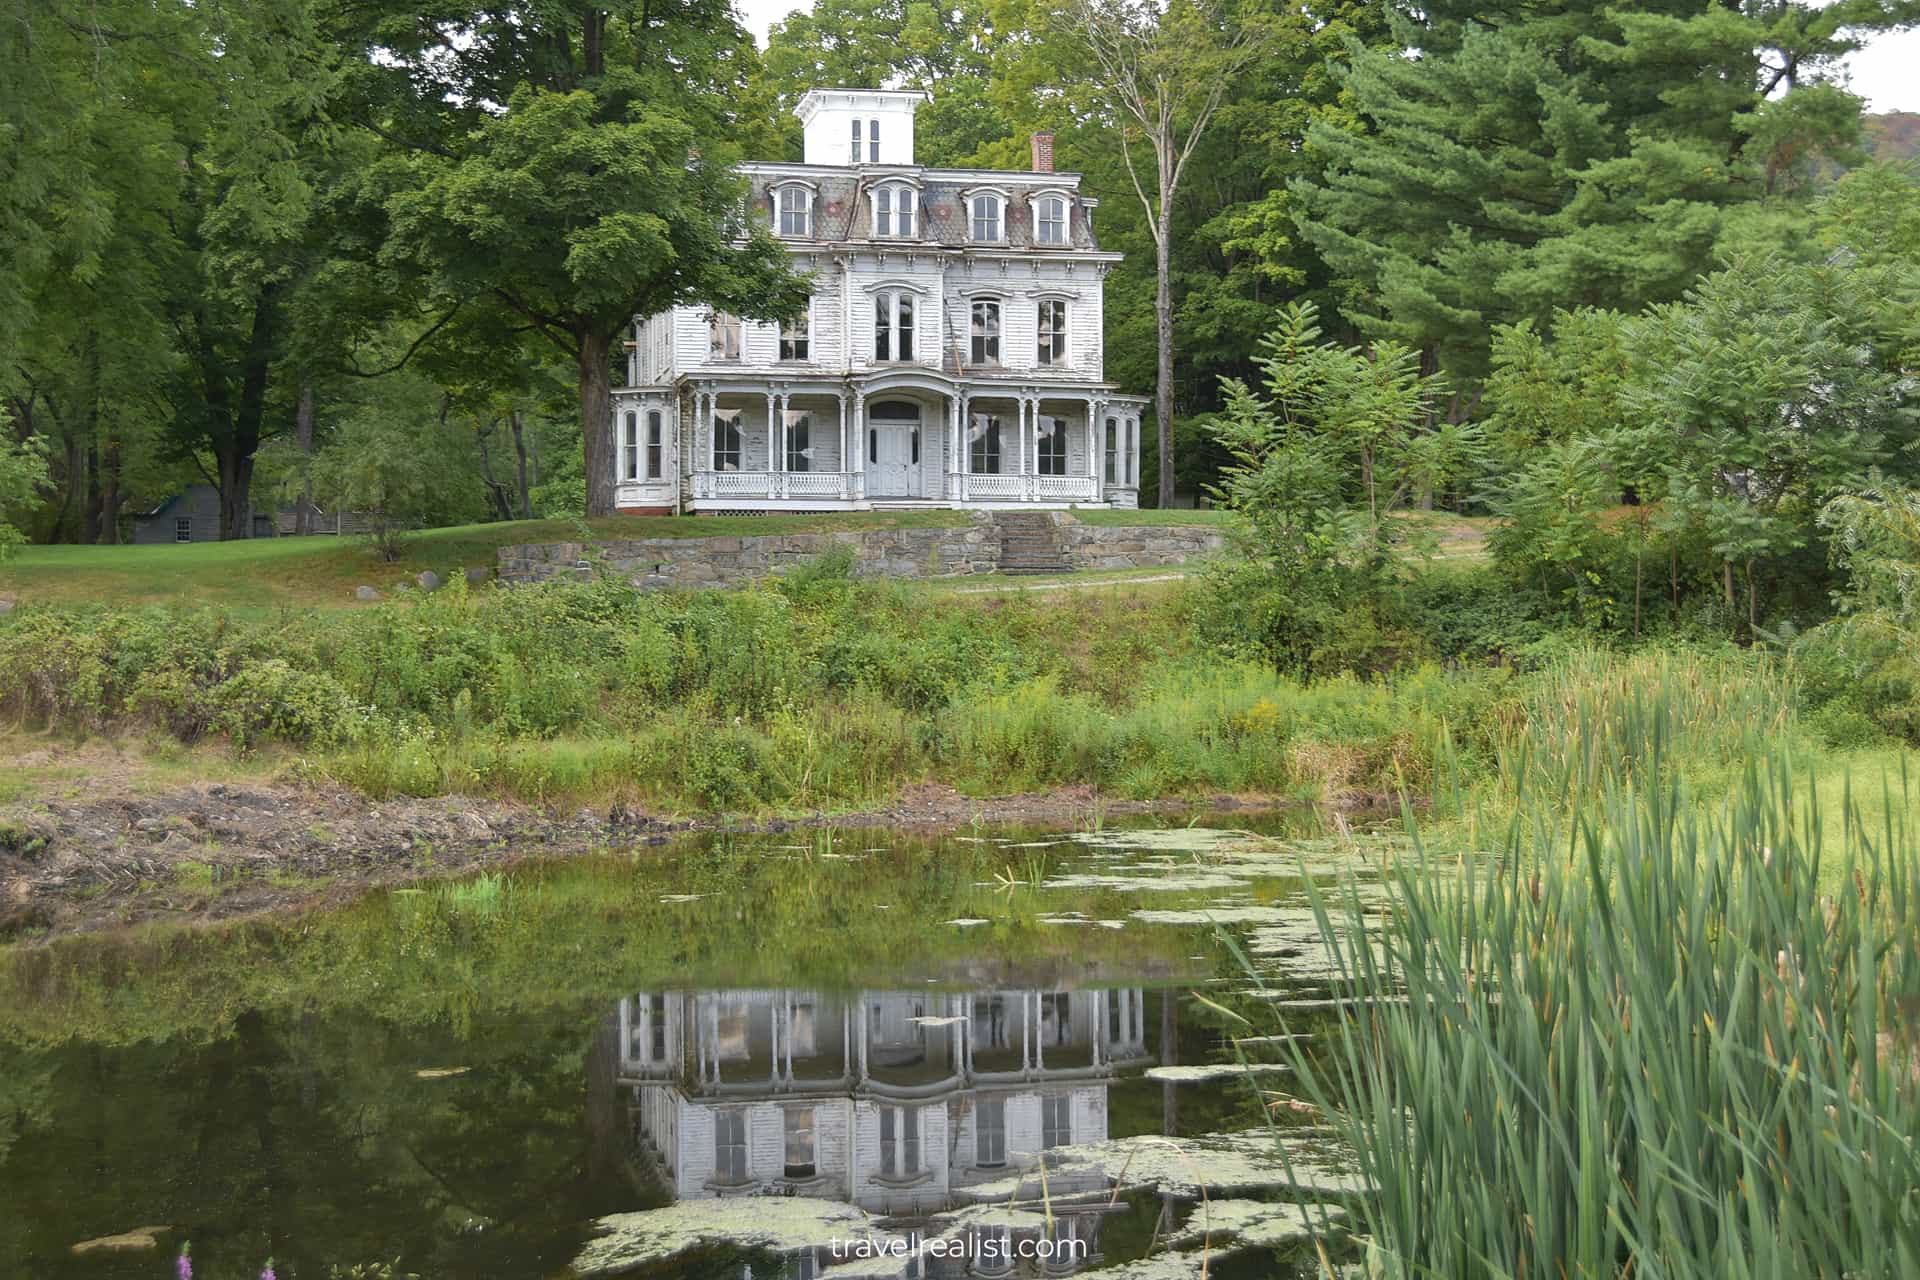 Peter Smith House reflections in canal in Waterloo Village Historic Site, New Jersey, US